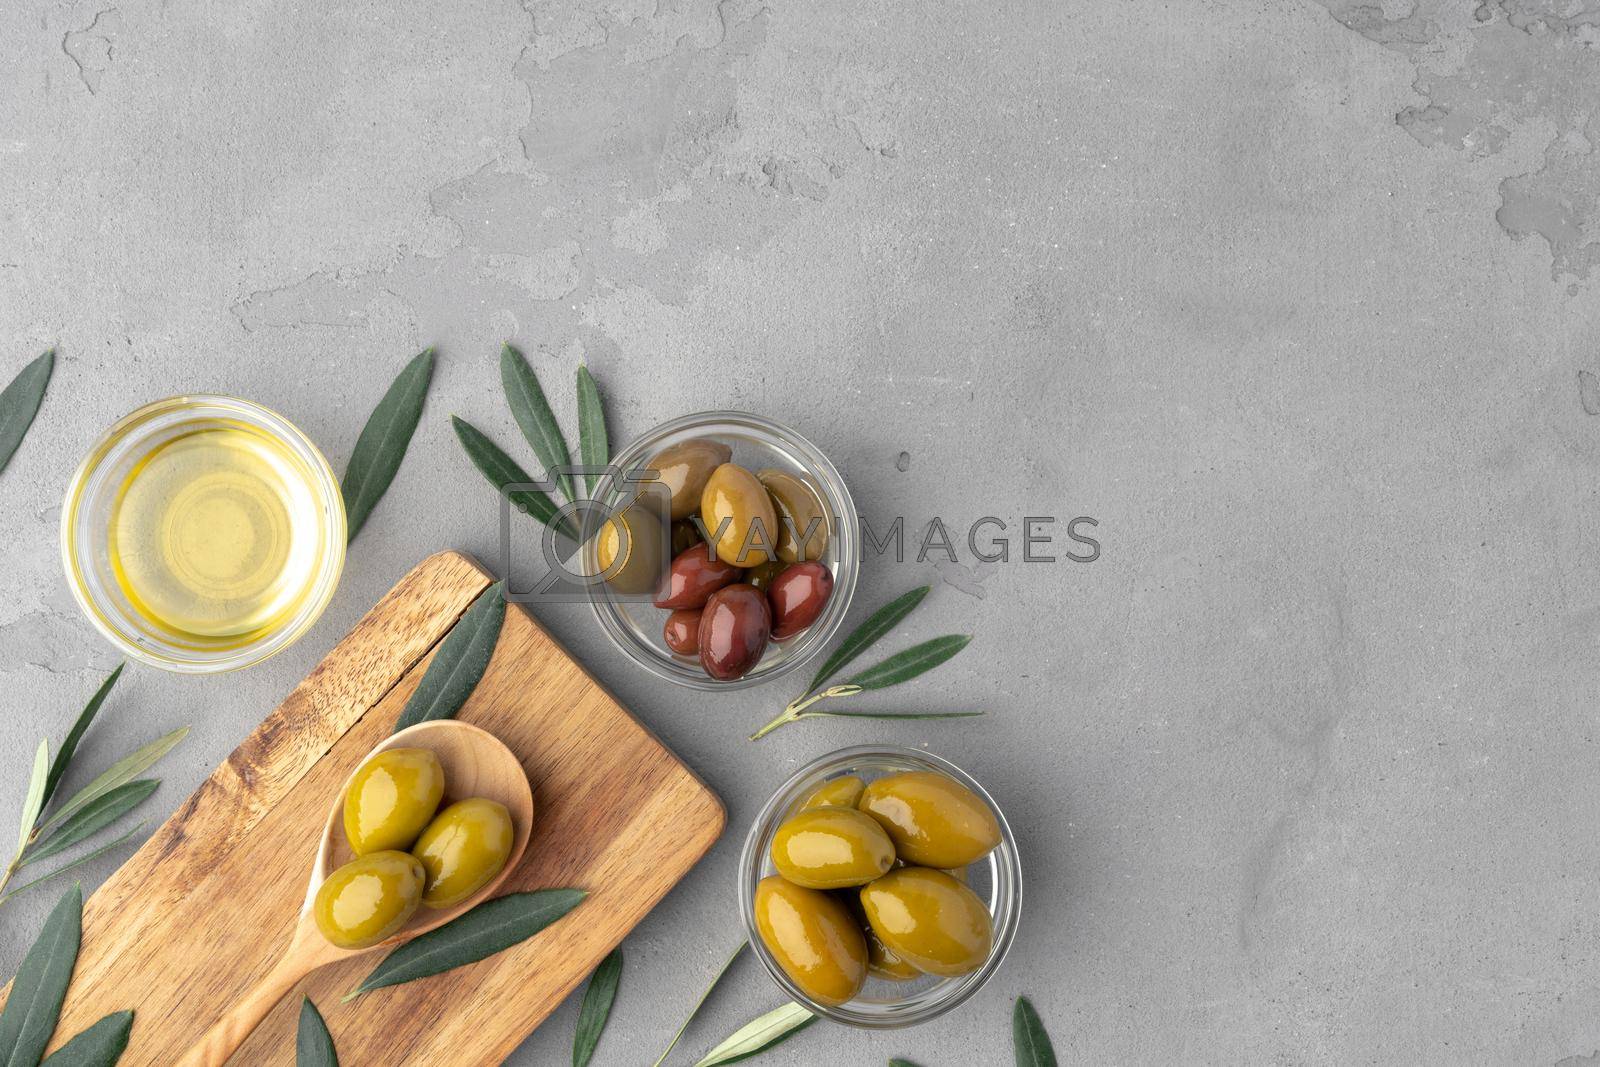 Royalty free image of Flatlay composition of olives and olive oil on gray background by Fabrikasimf